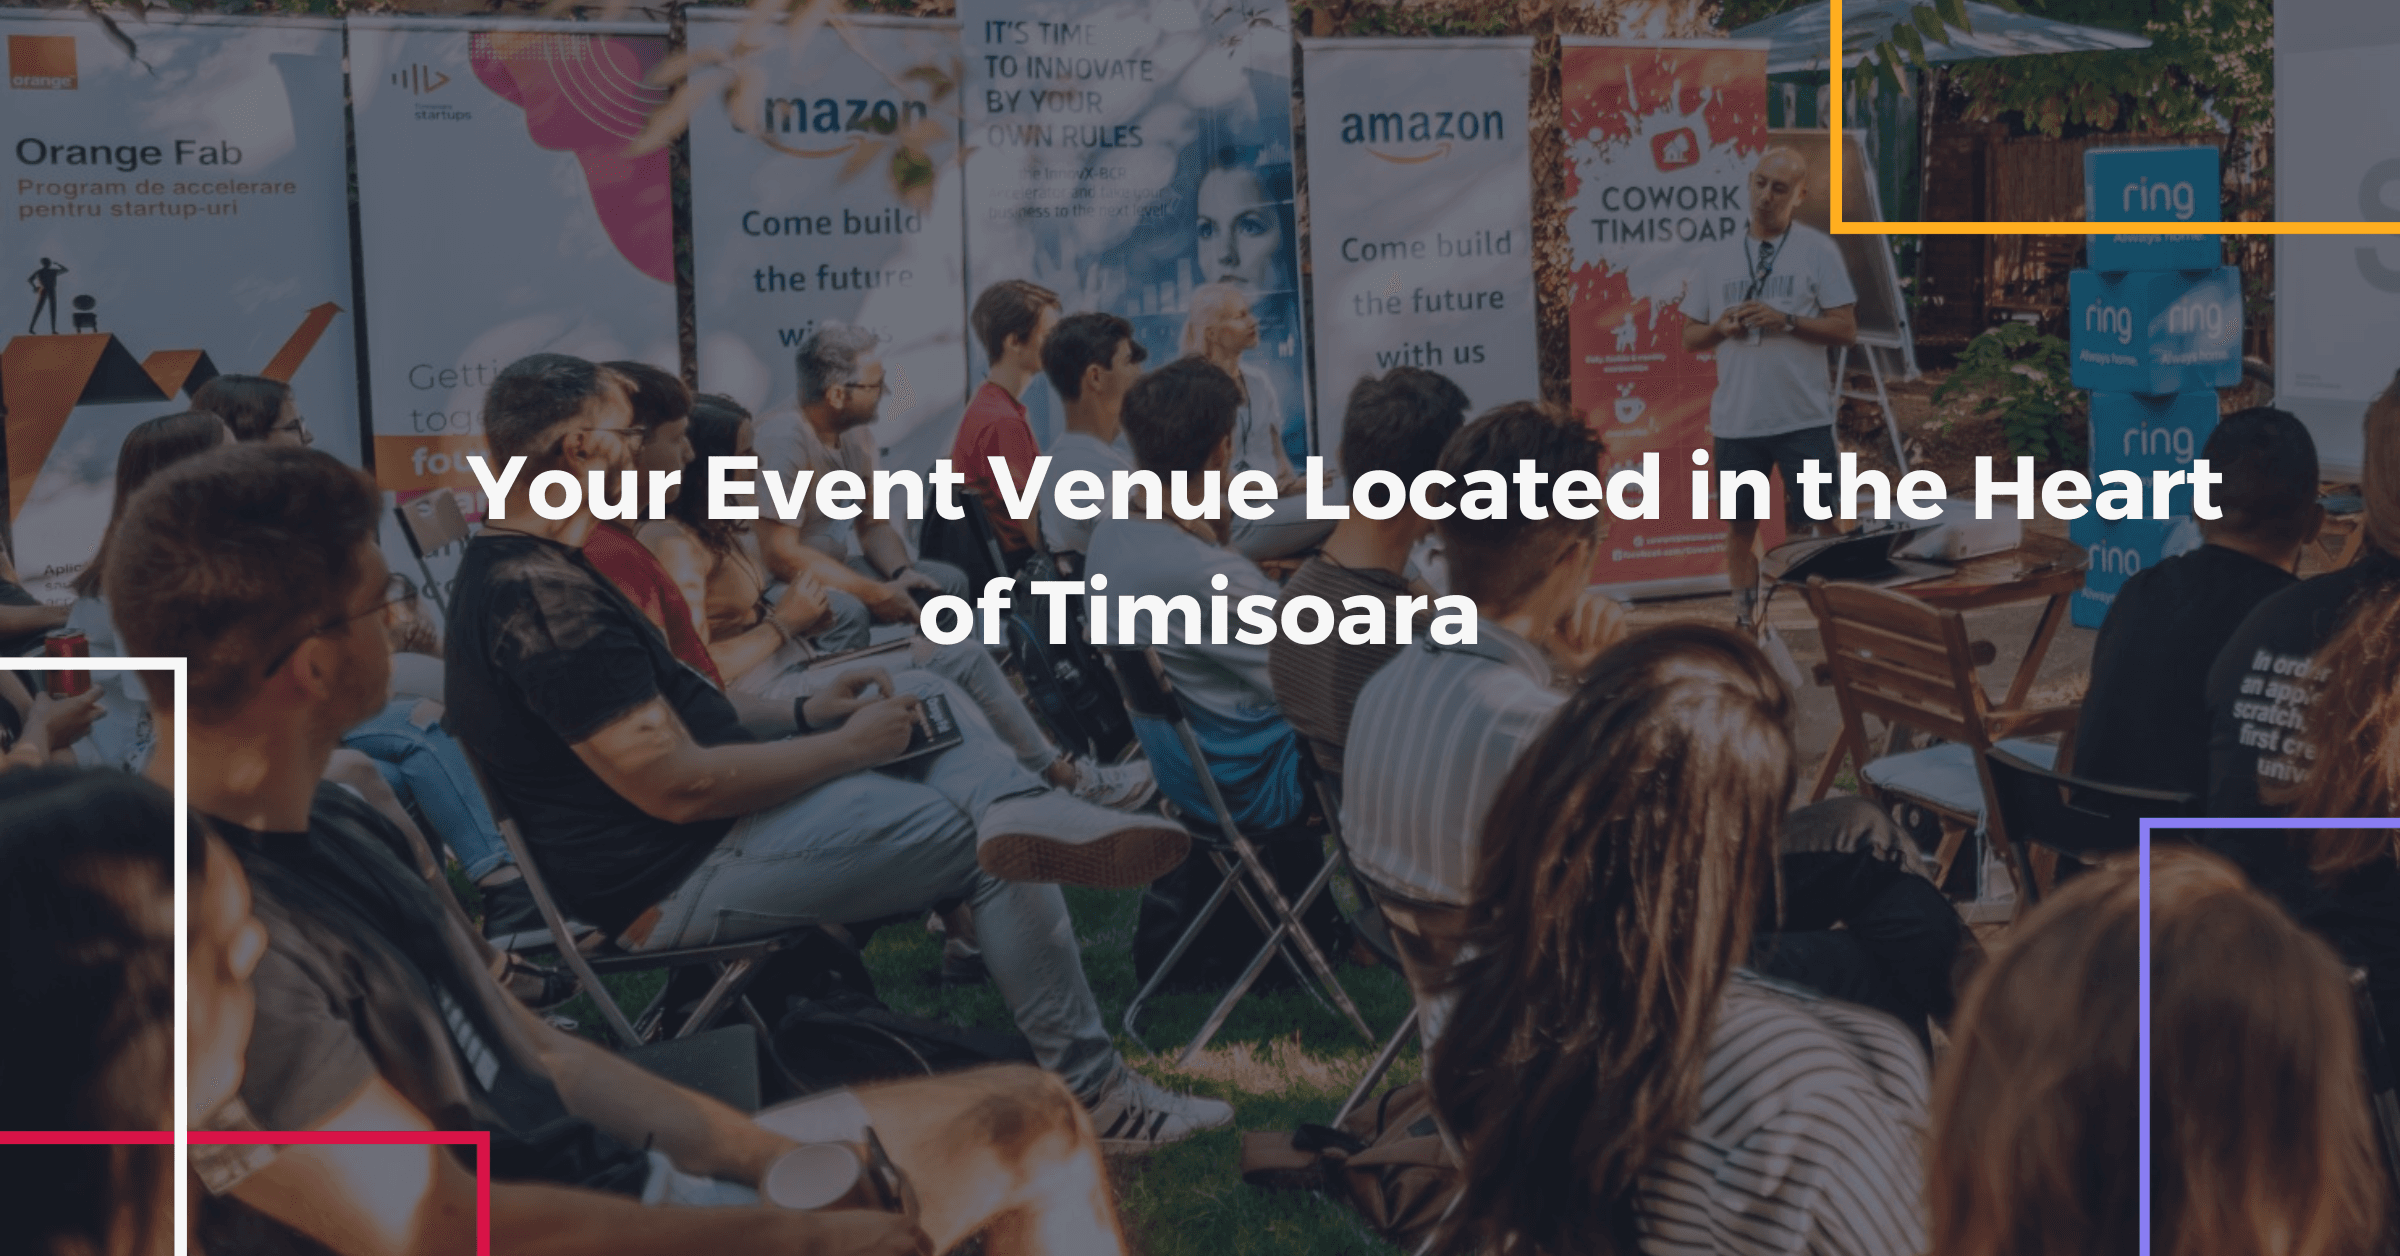 Your event venue located in the heart of Timisoara